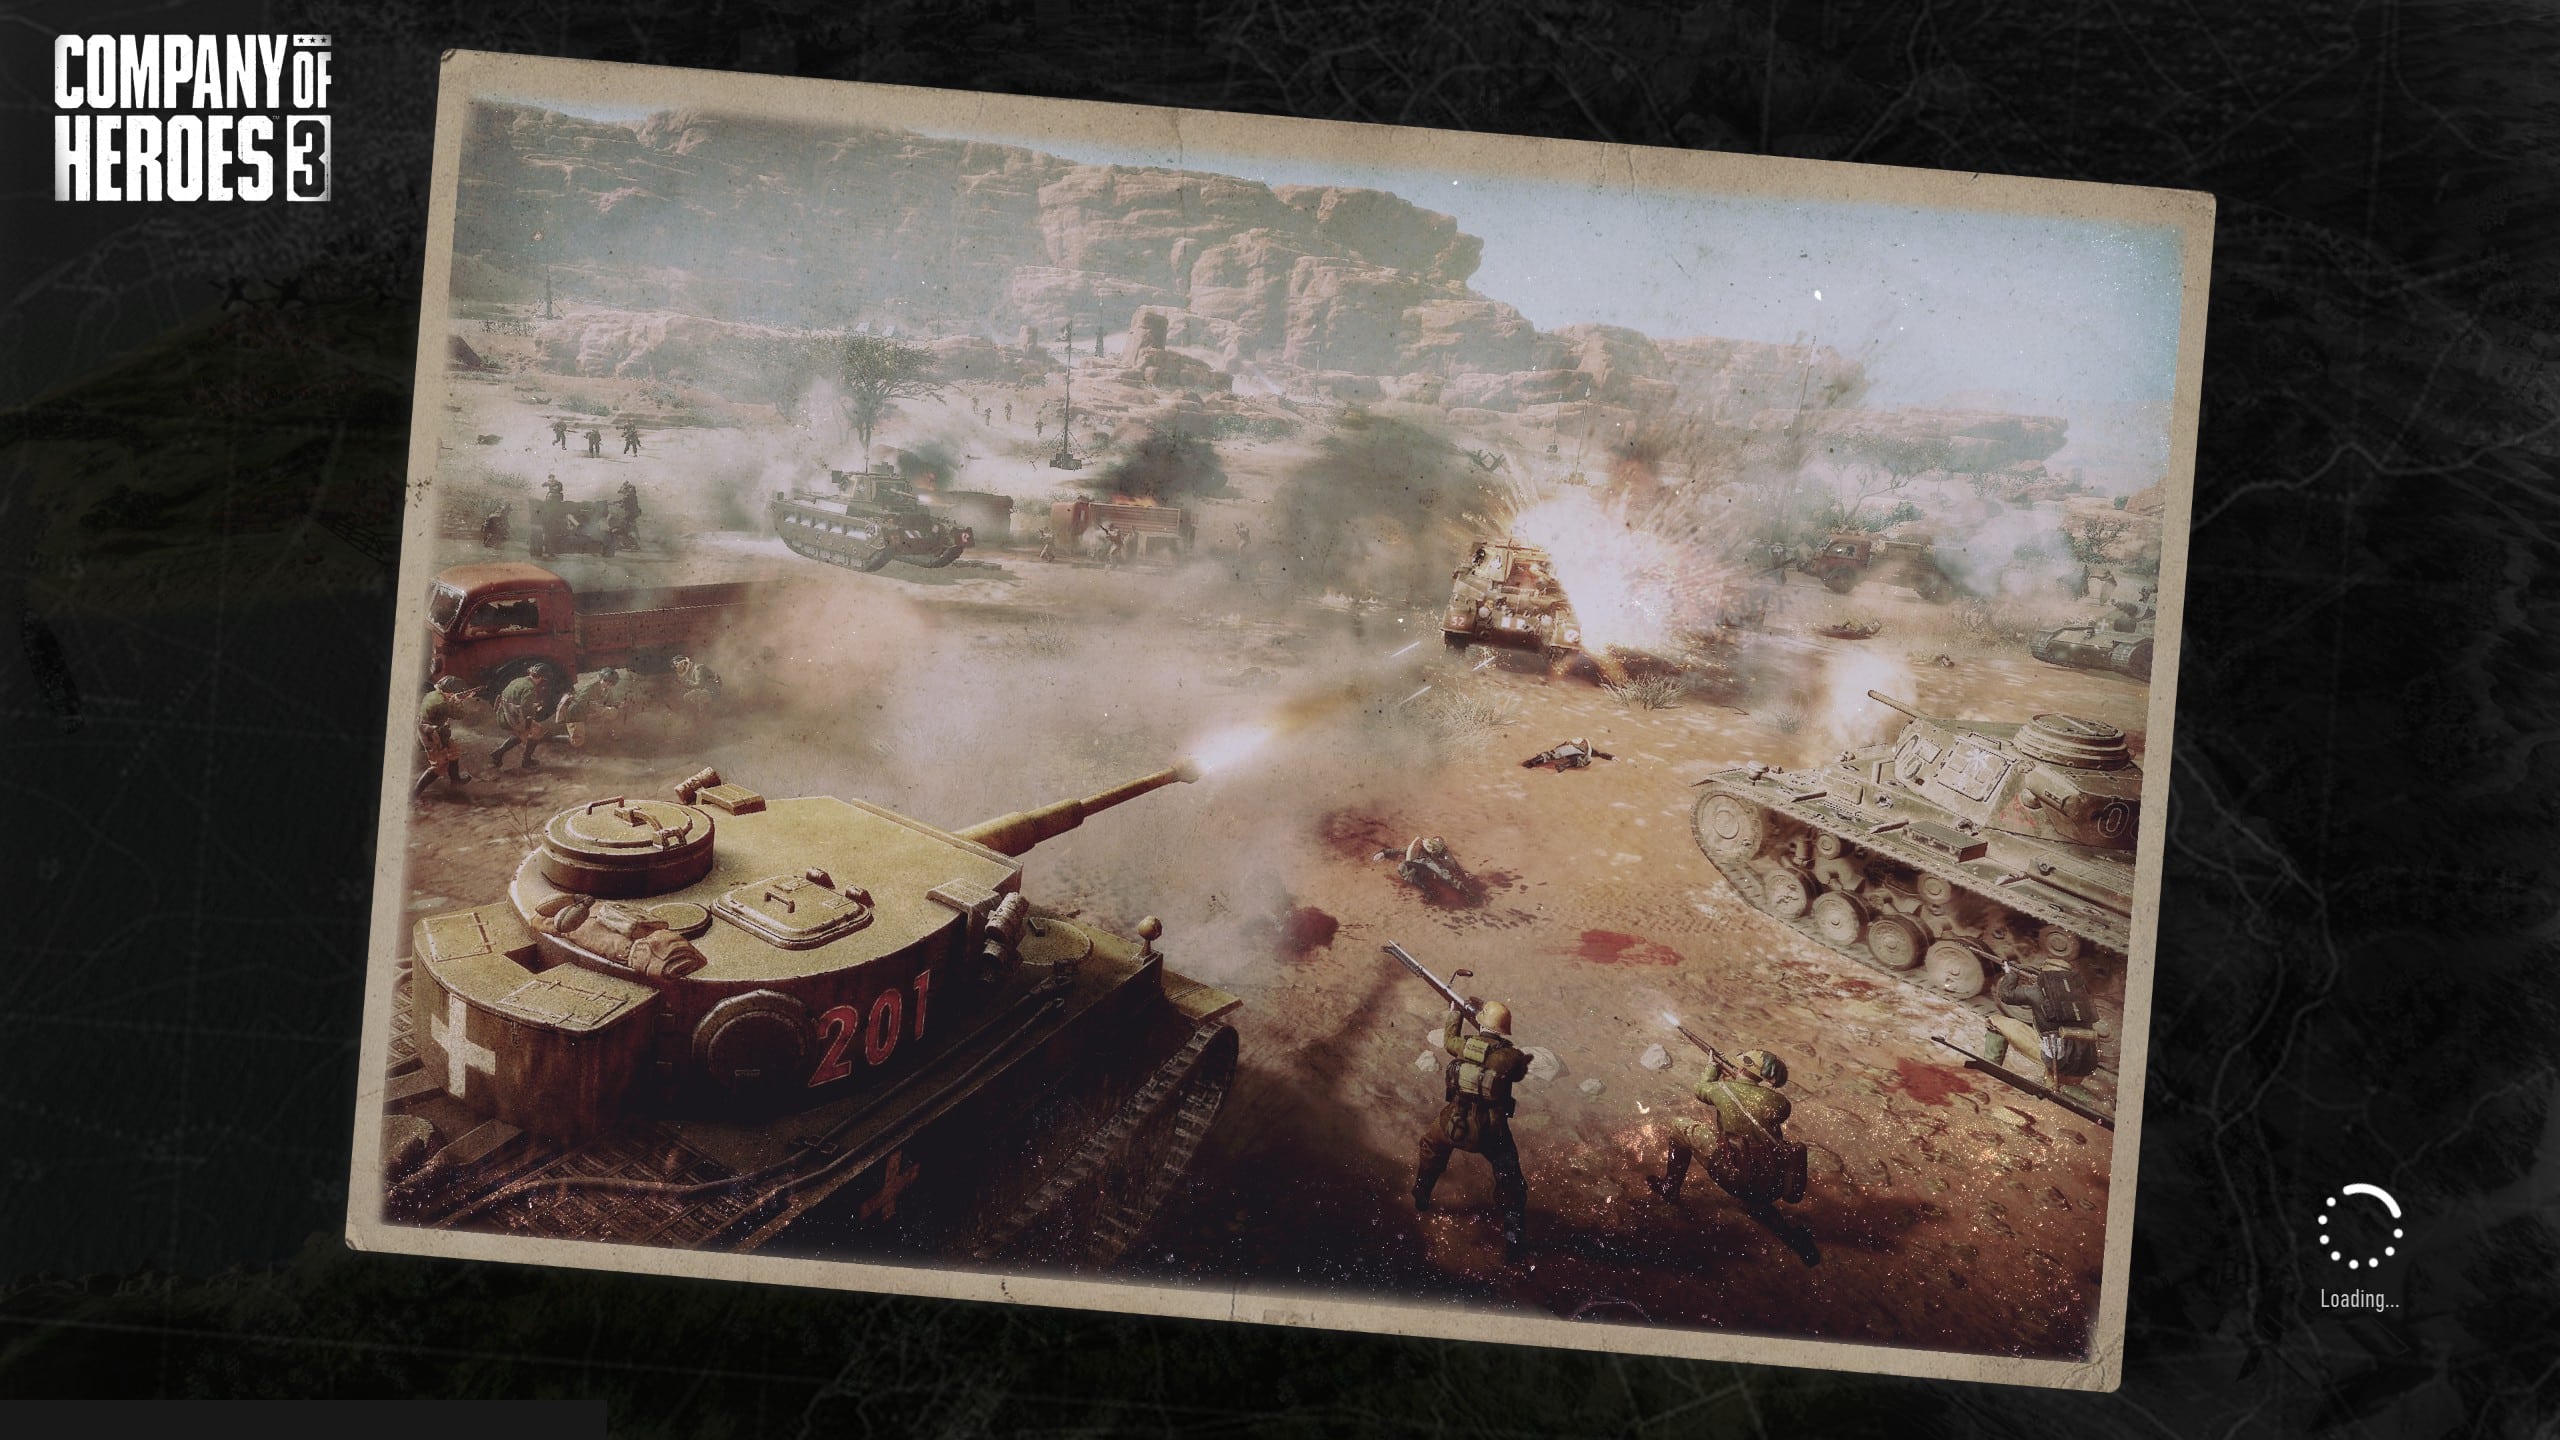 Company of Heroes 3 Hands On - Impresiones GamersRD 13